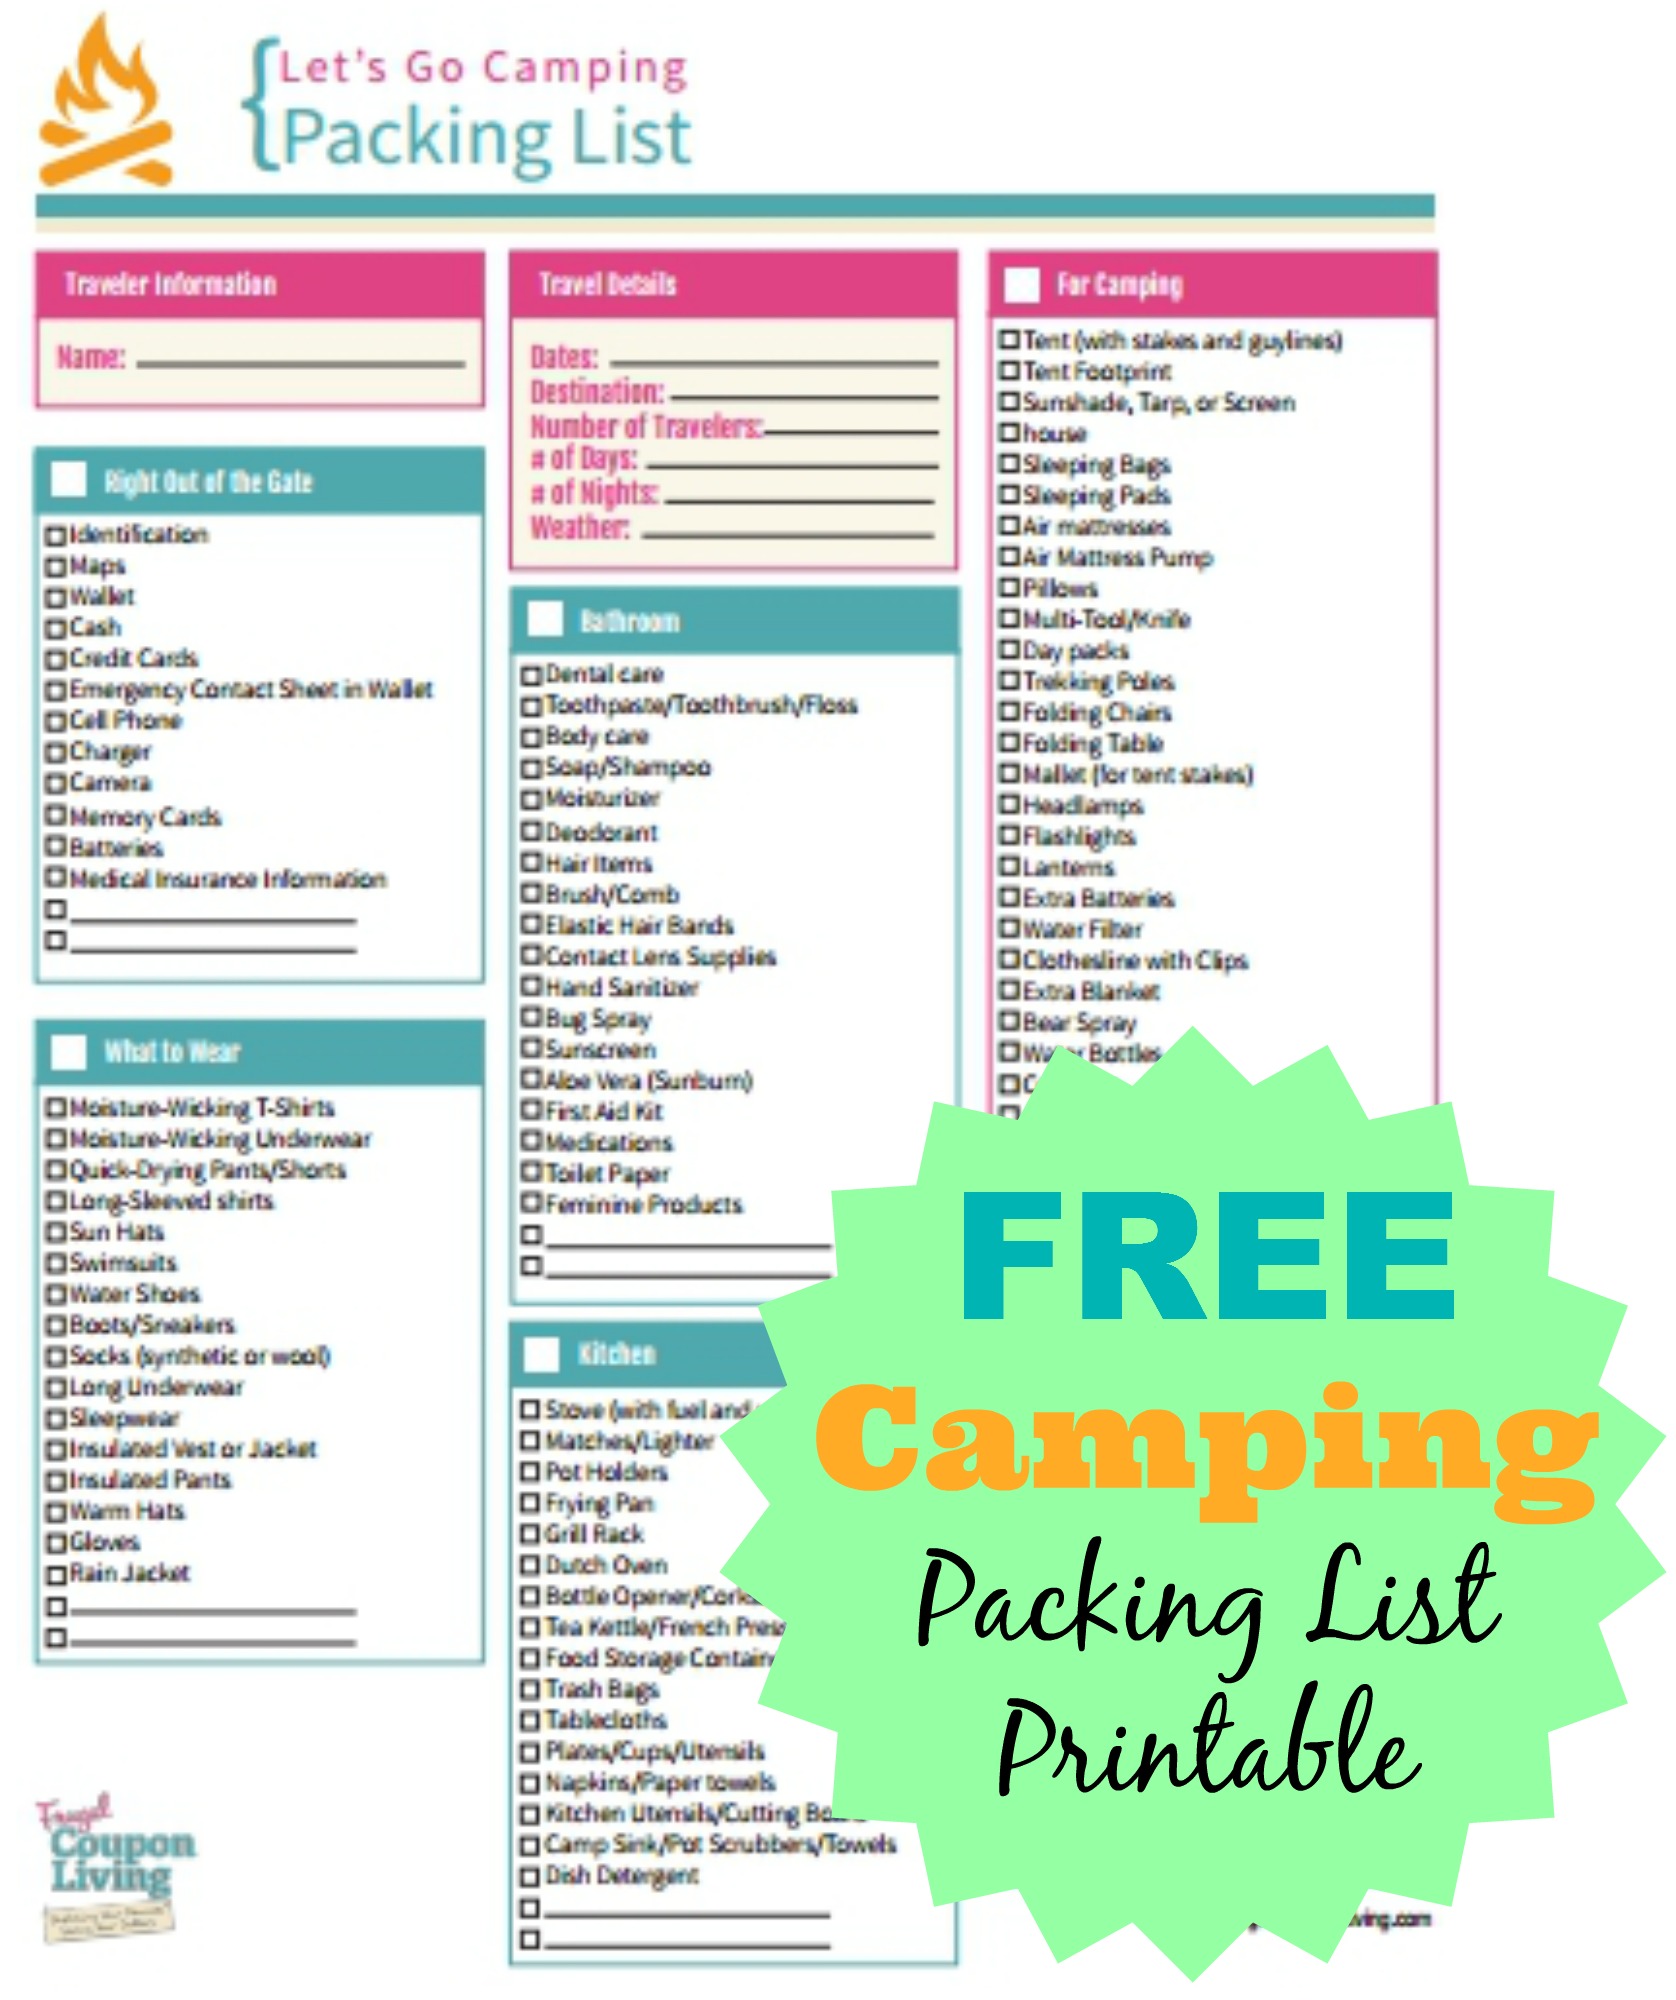 FREE Camping Packing List Printable